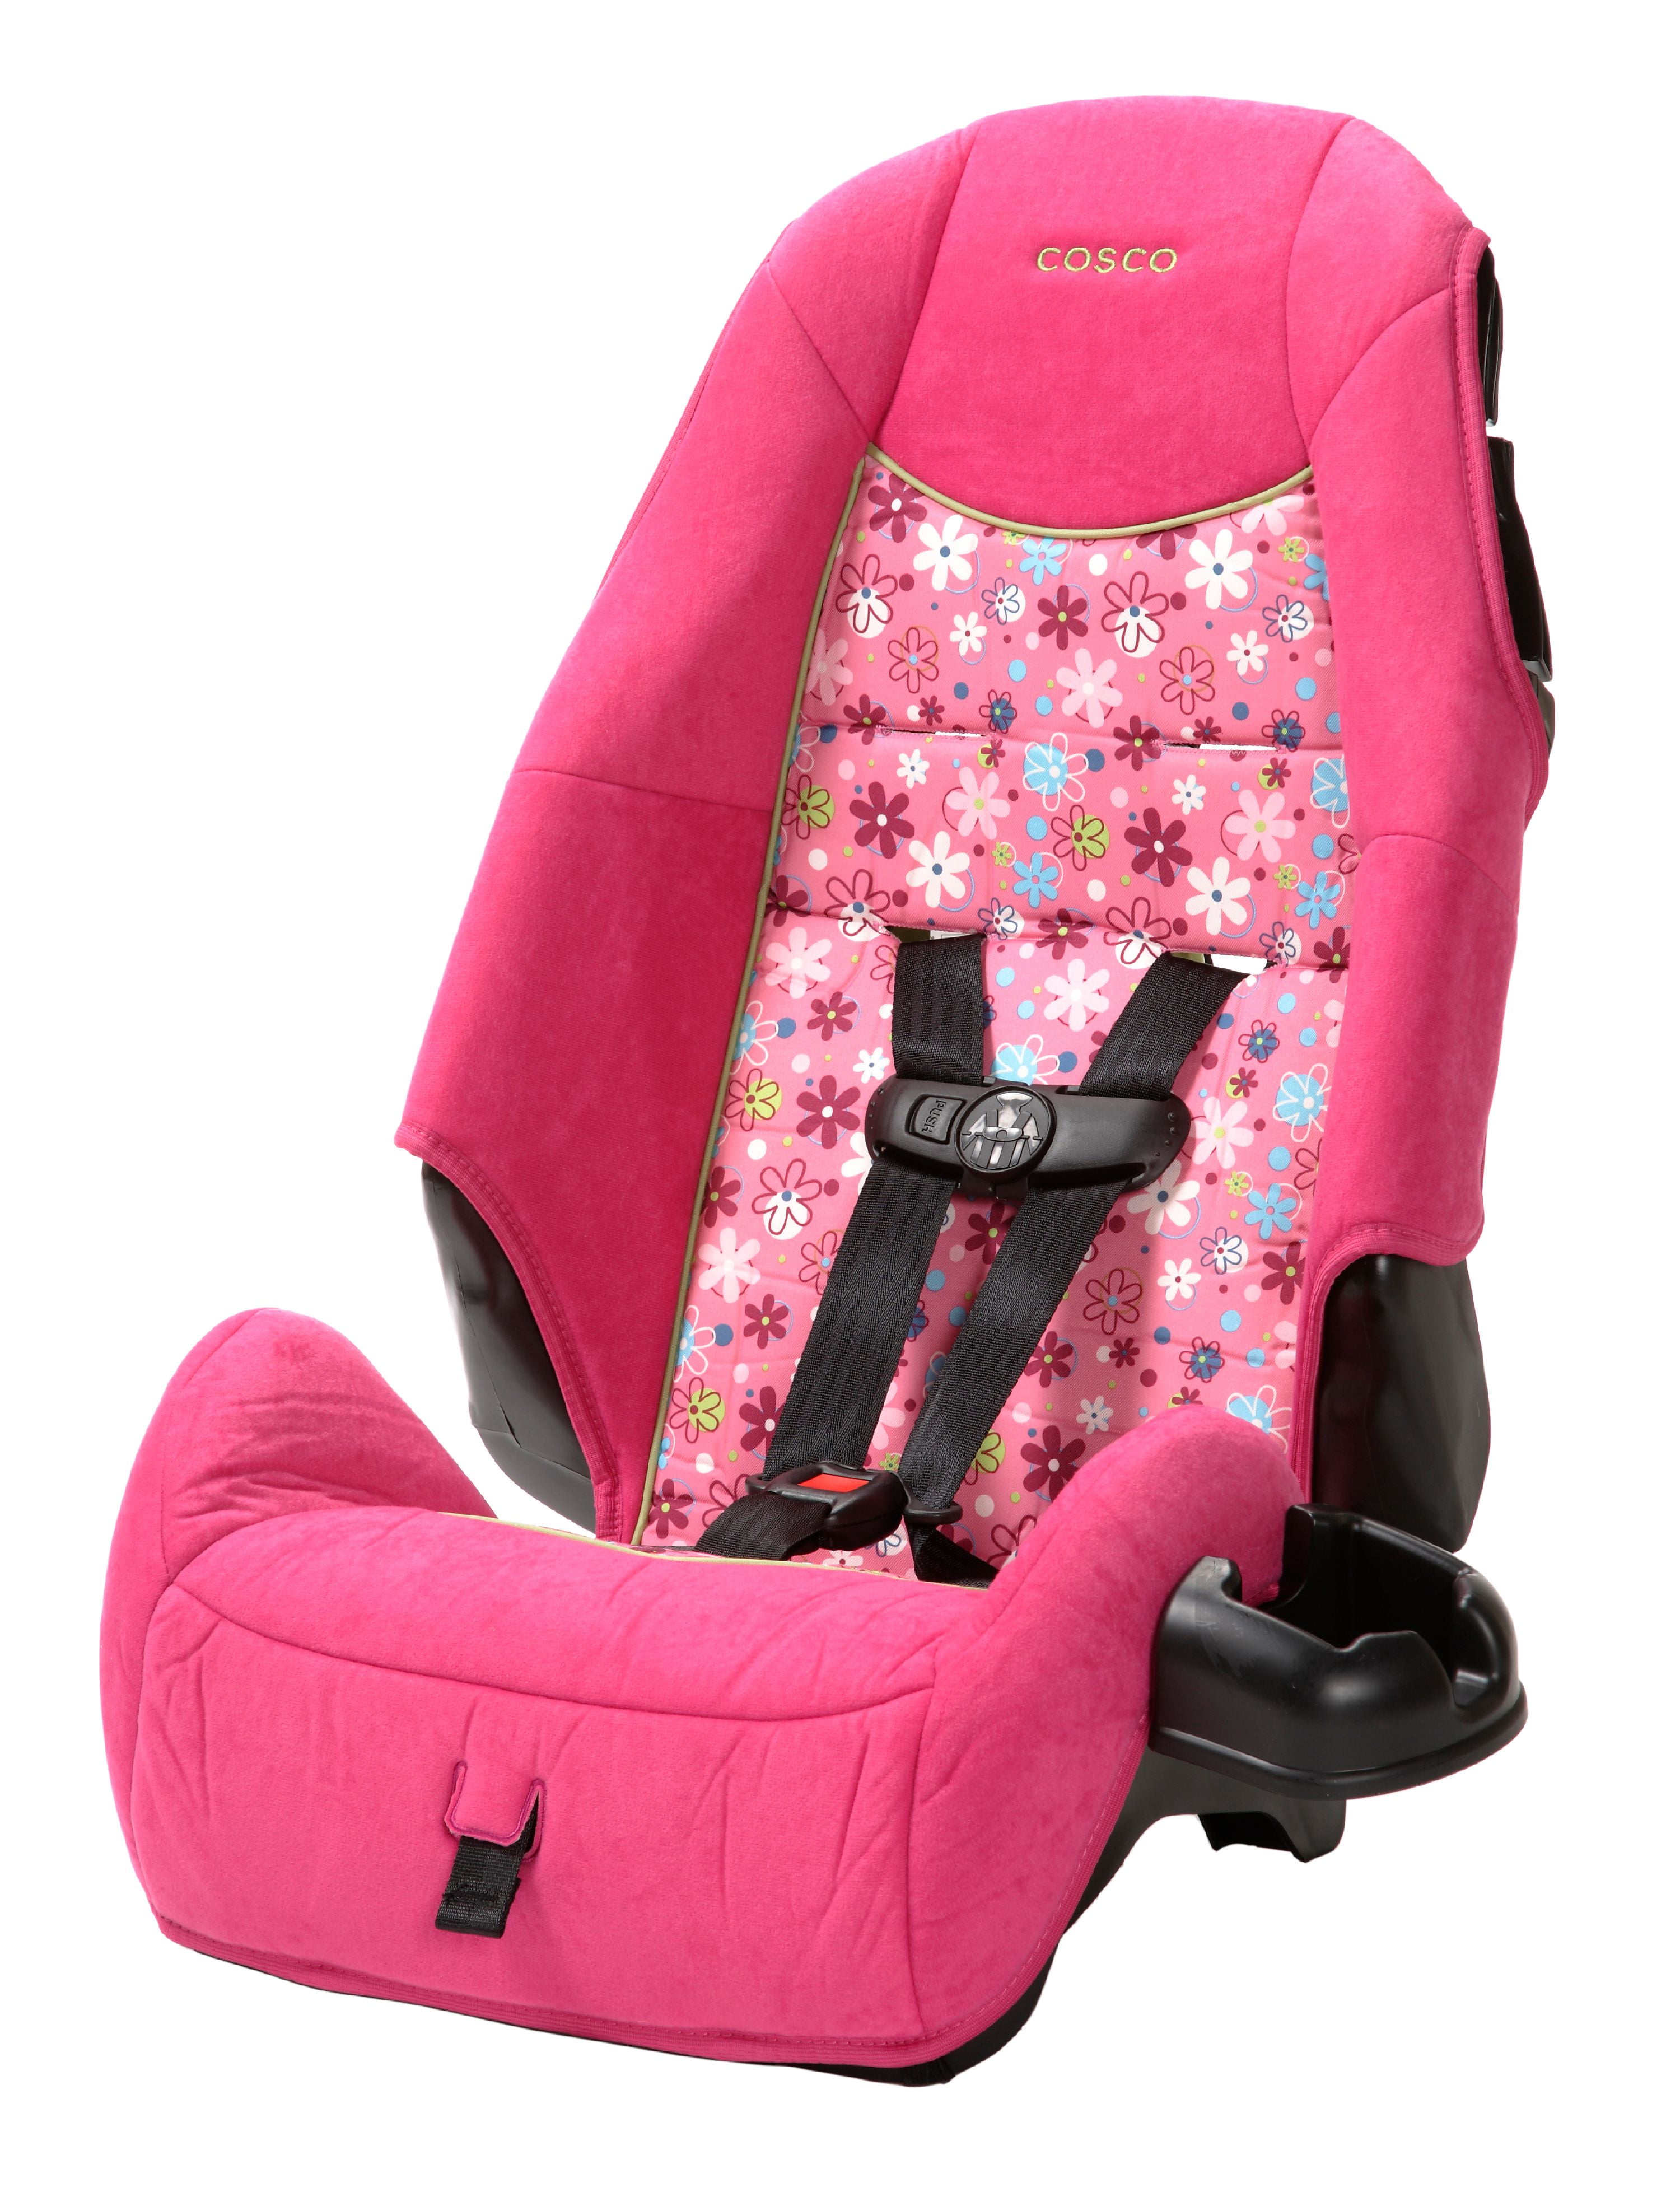 Cosco High Back Booster Car Seat, Pink 